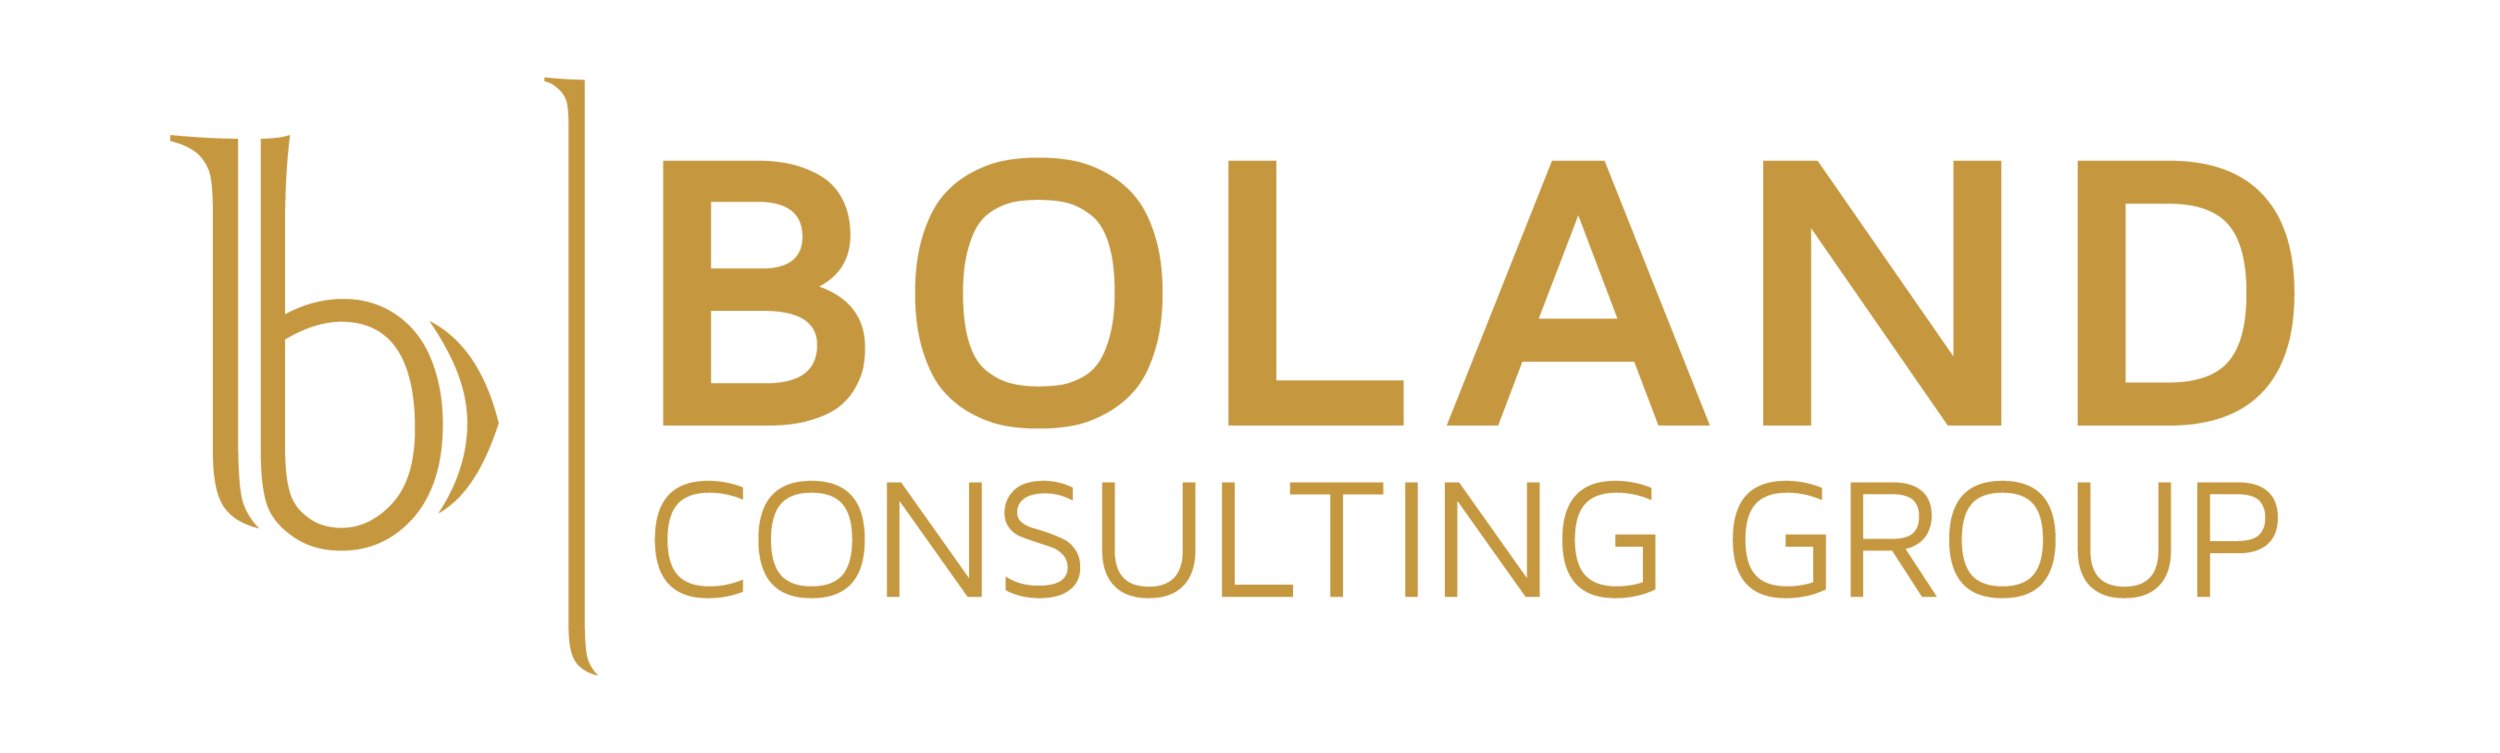 Boland Consulting Group